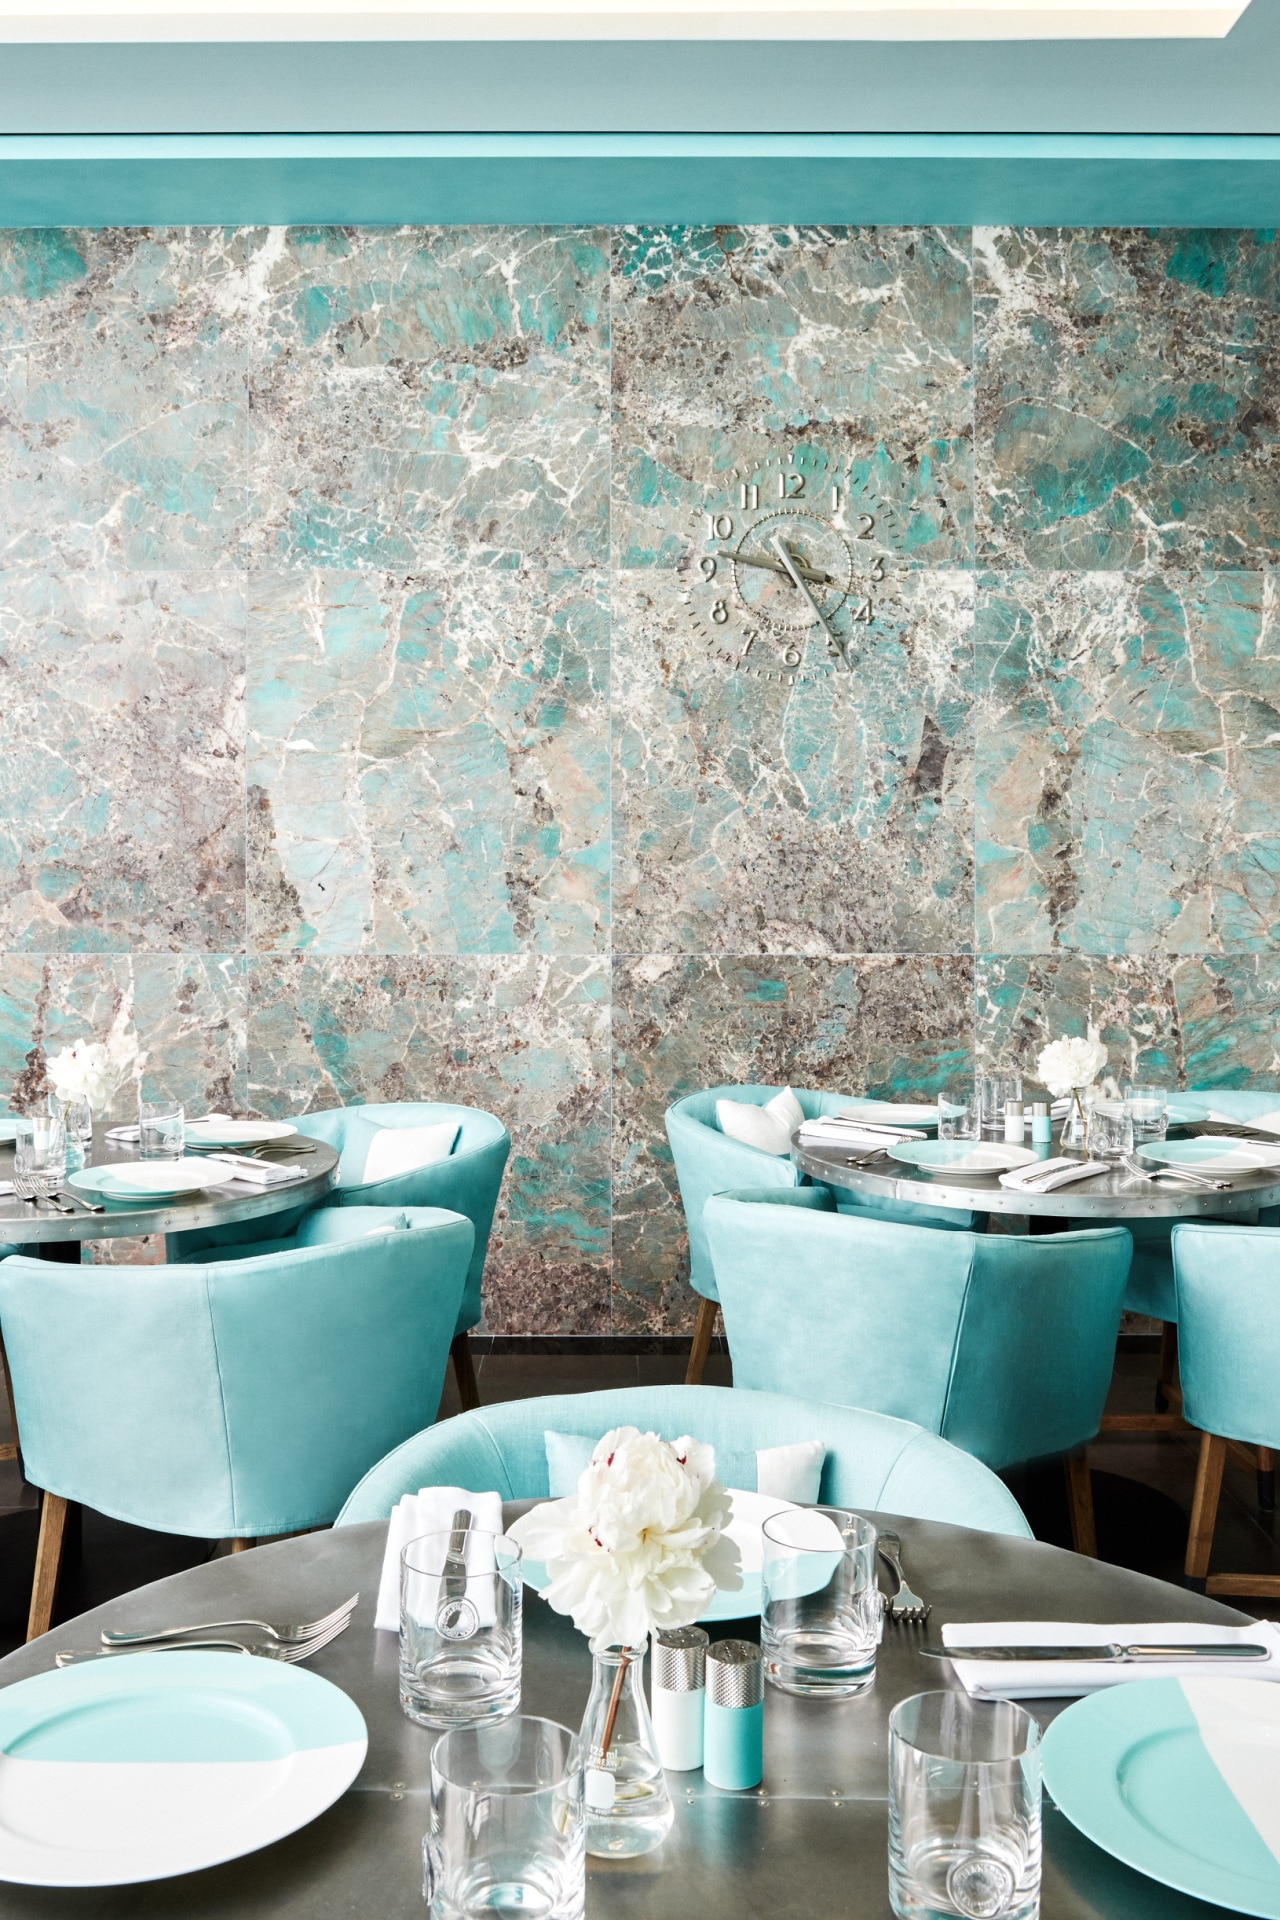 Dining at the Tiffany Blue Box Café in 